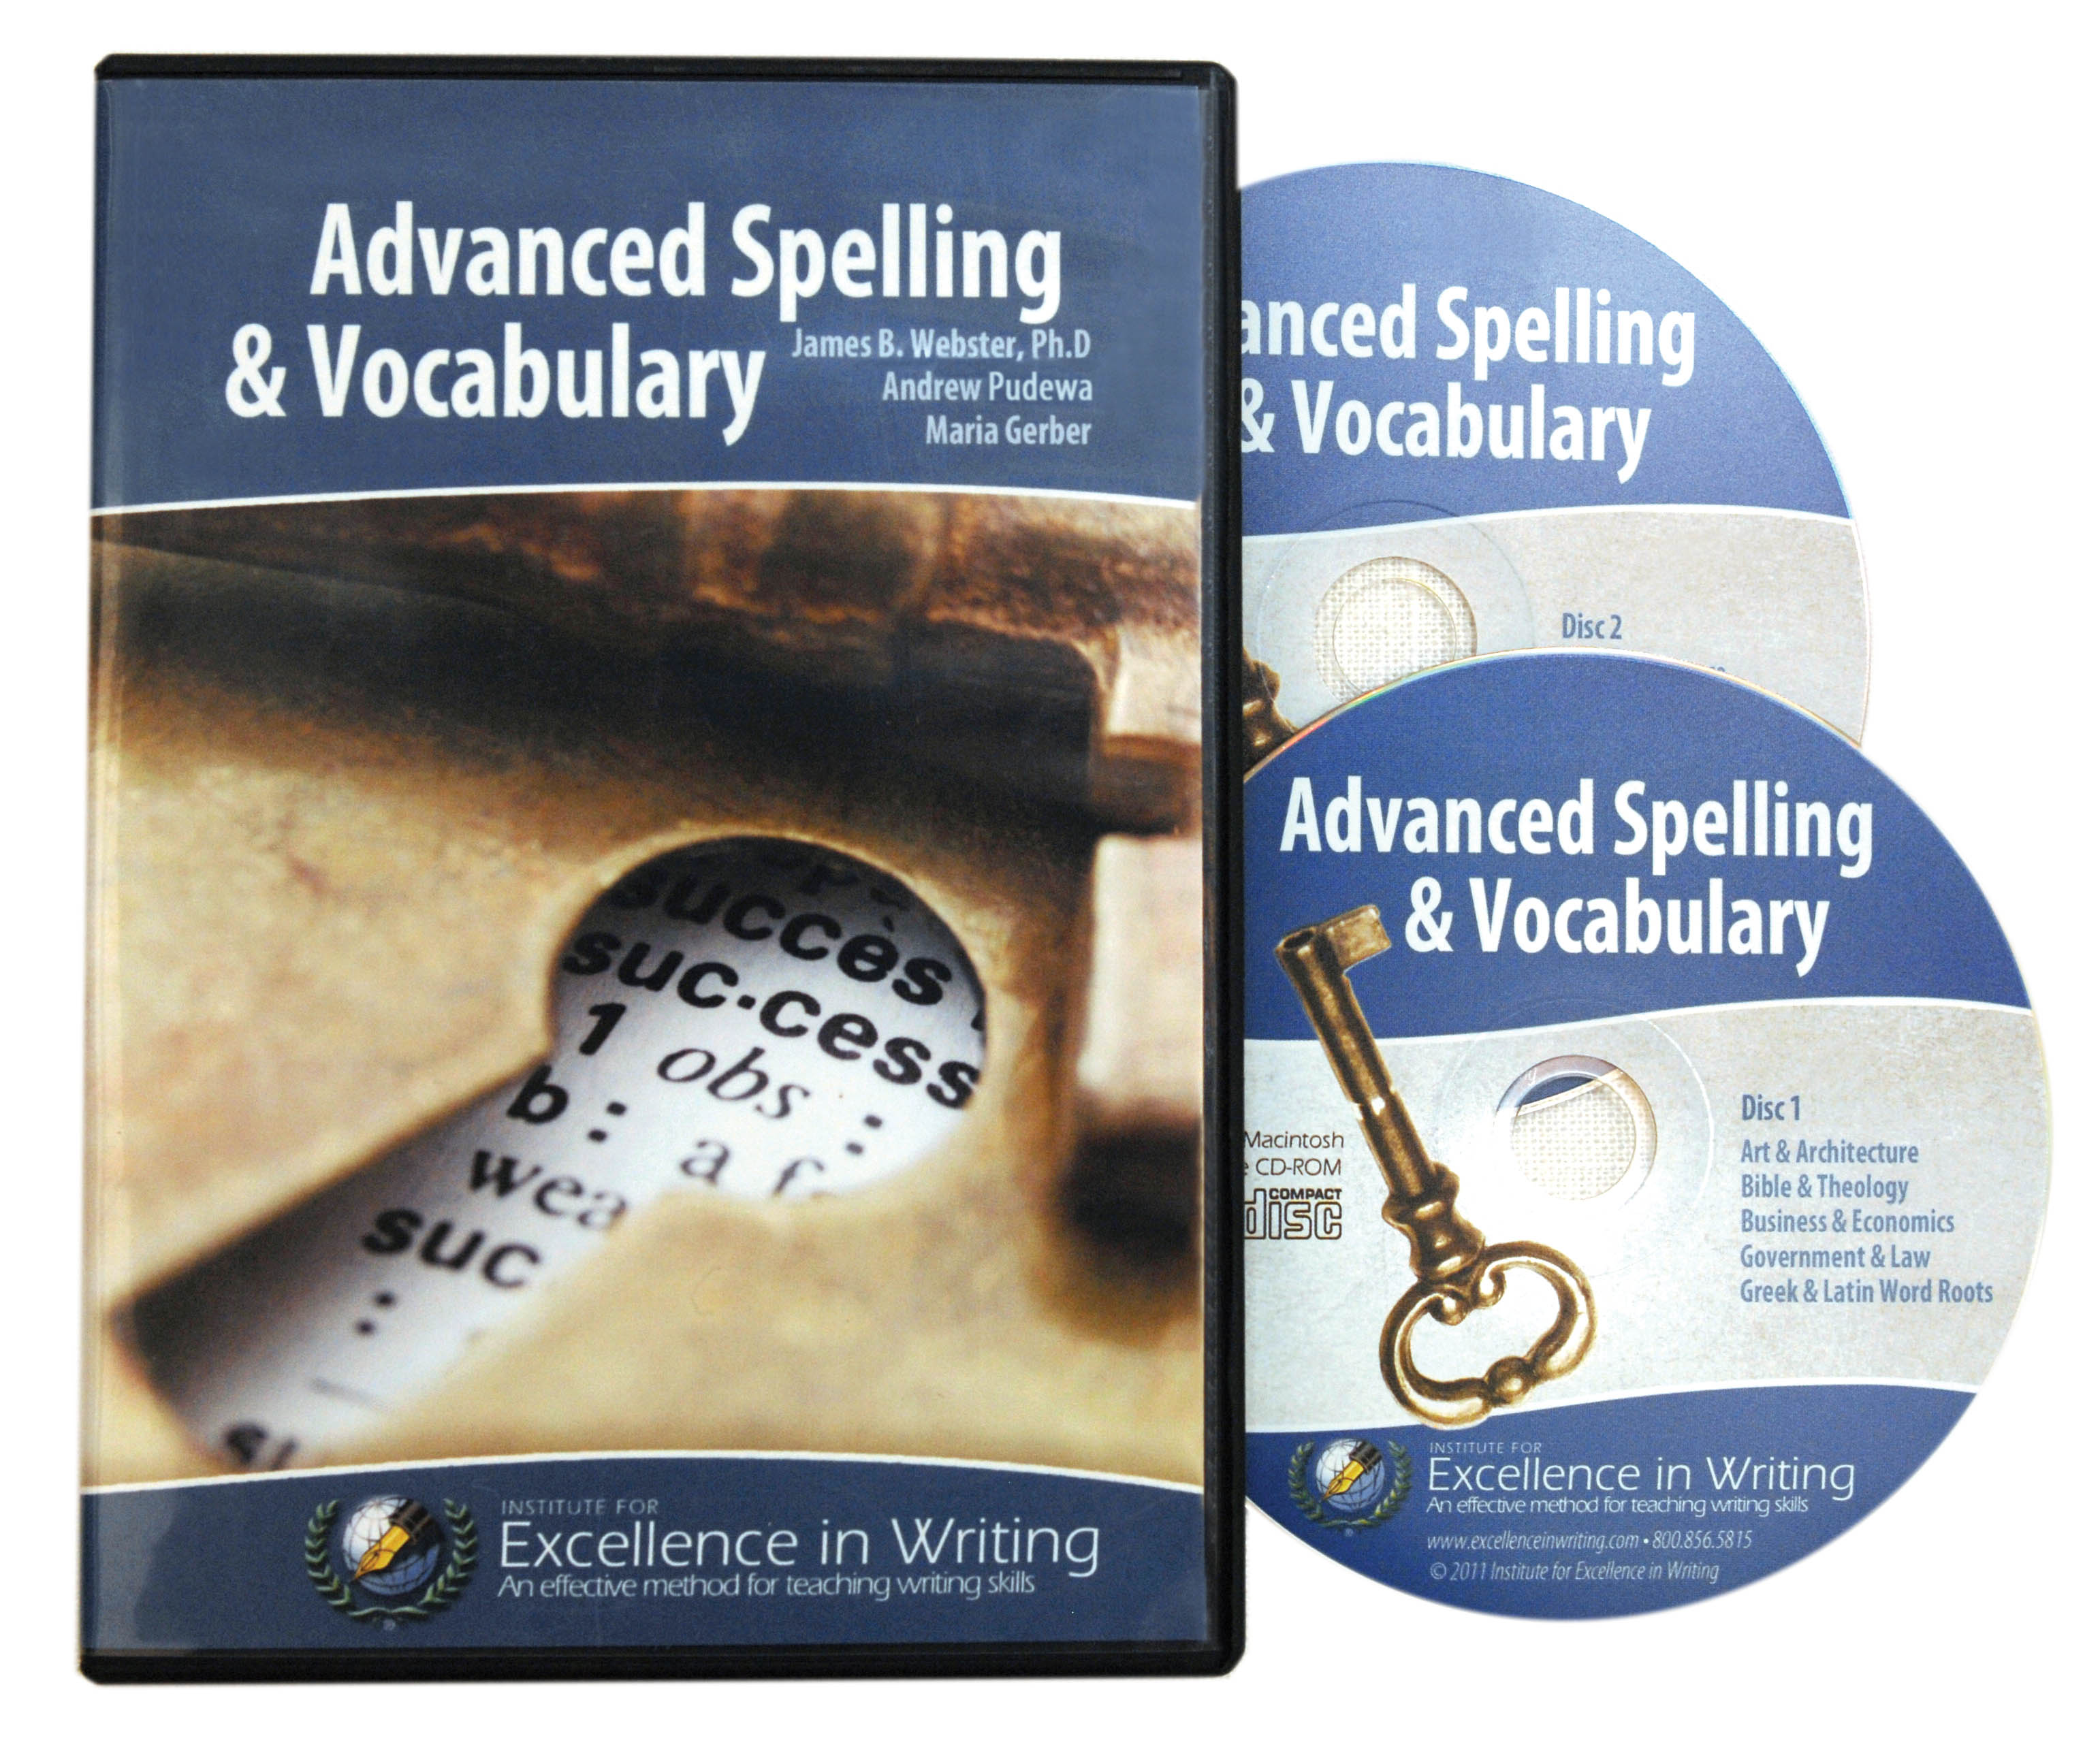 Advanced Spelling & Vocabulary [CDs DISCONTINUED]